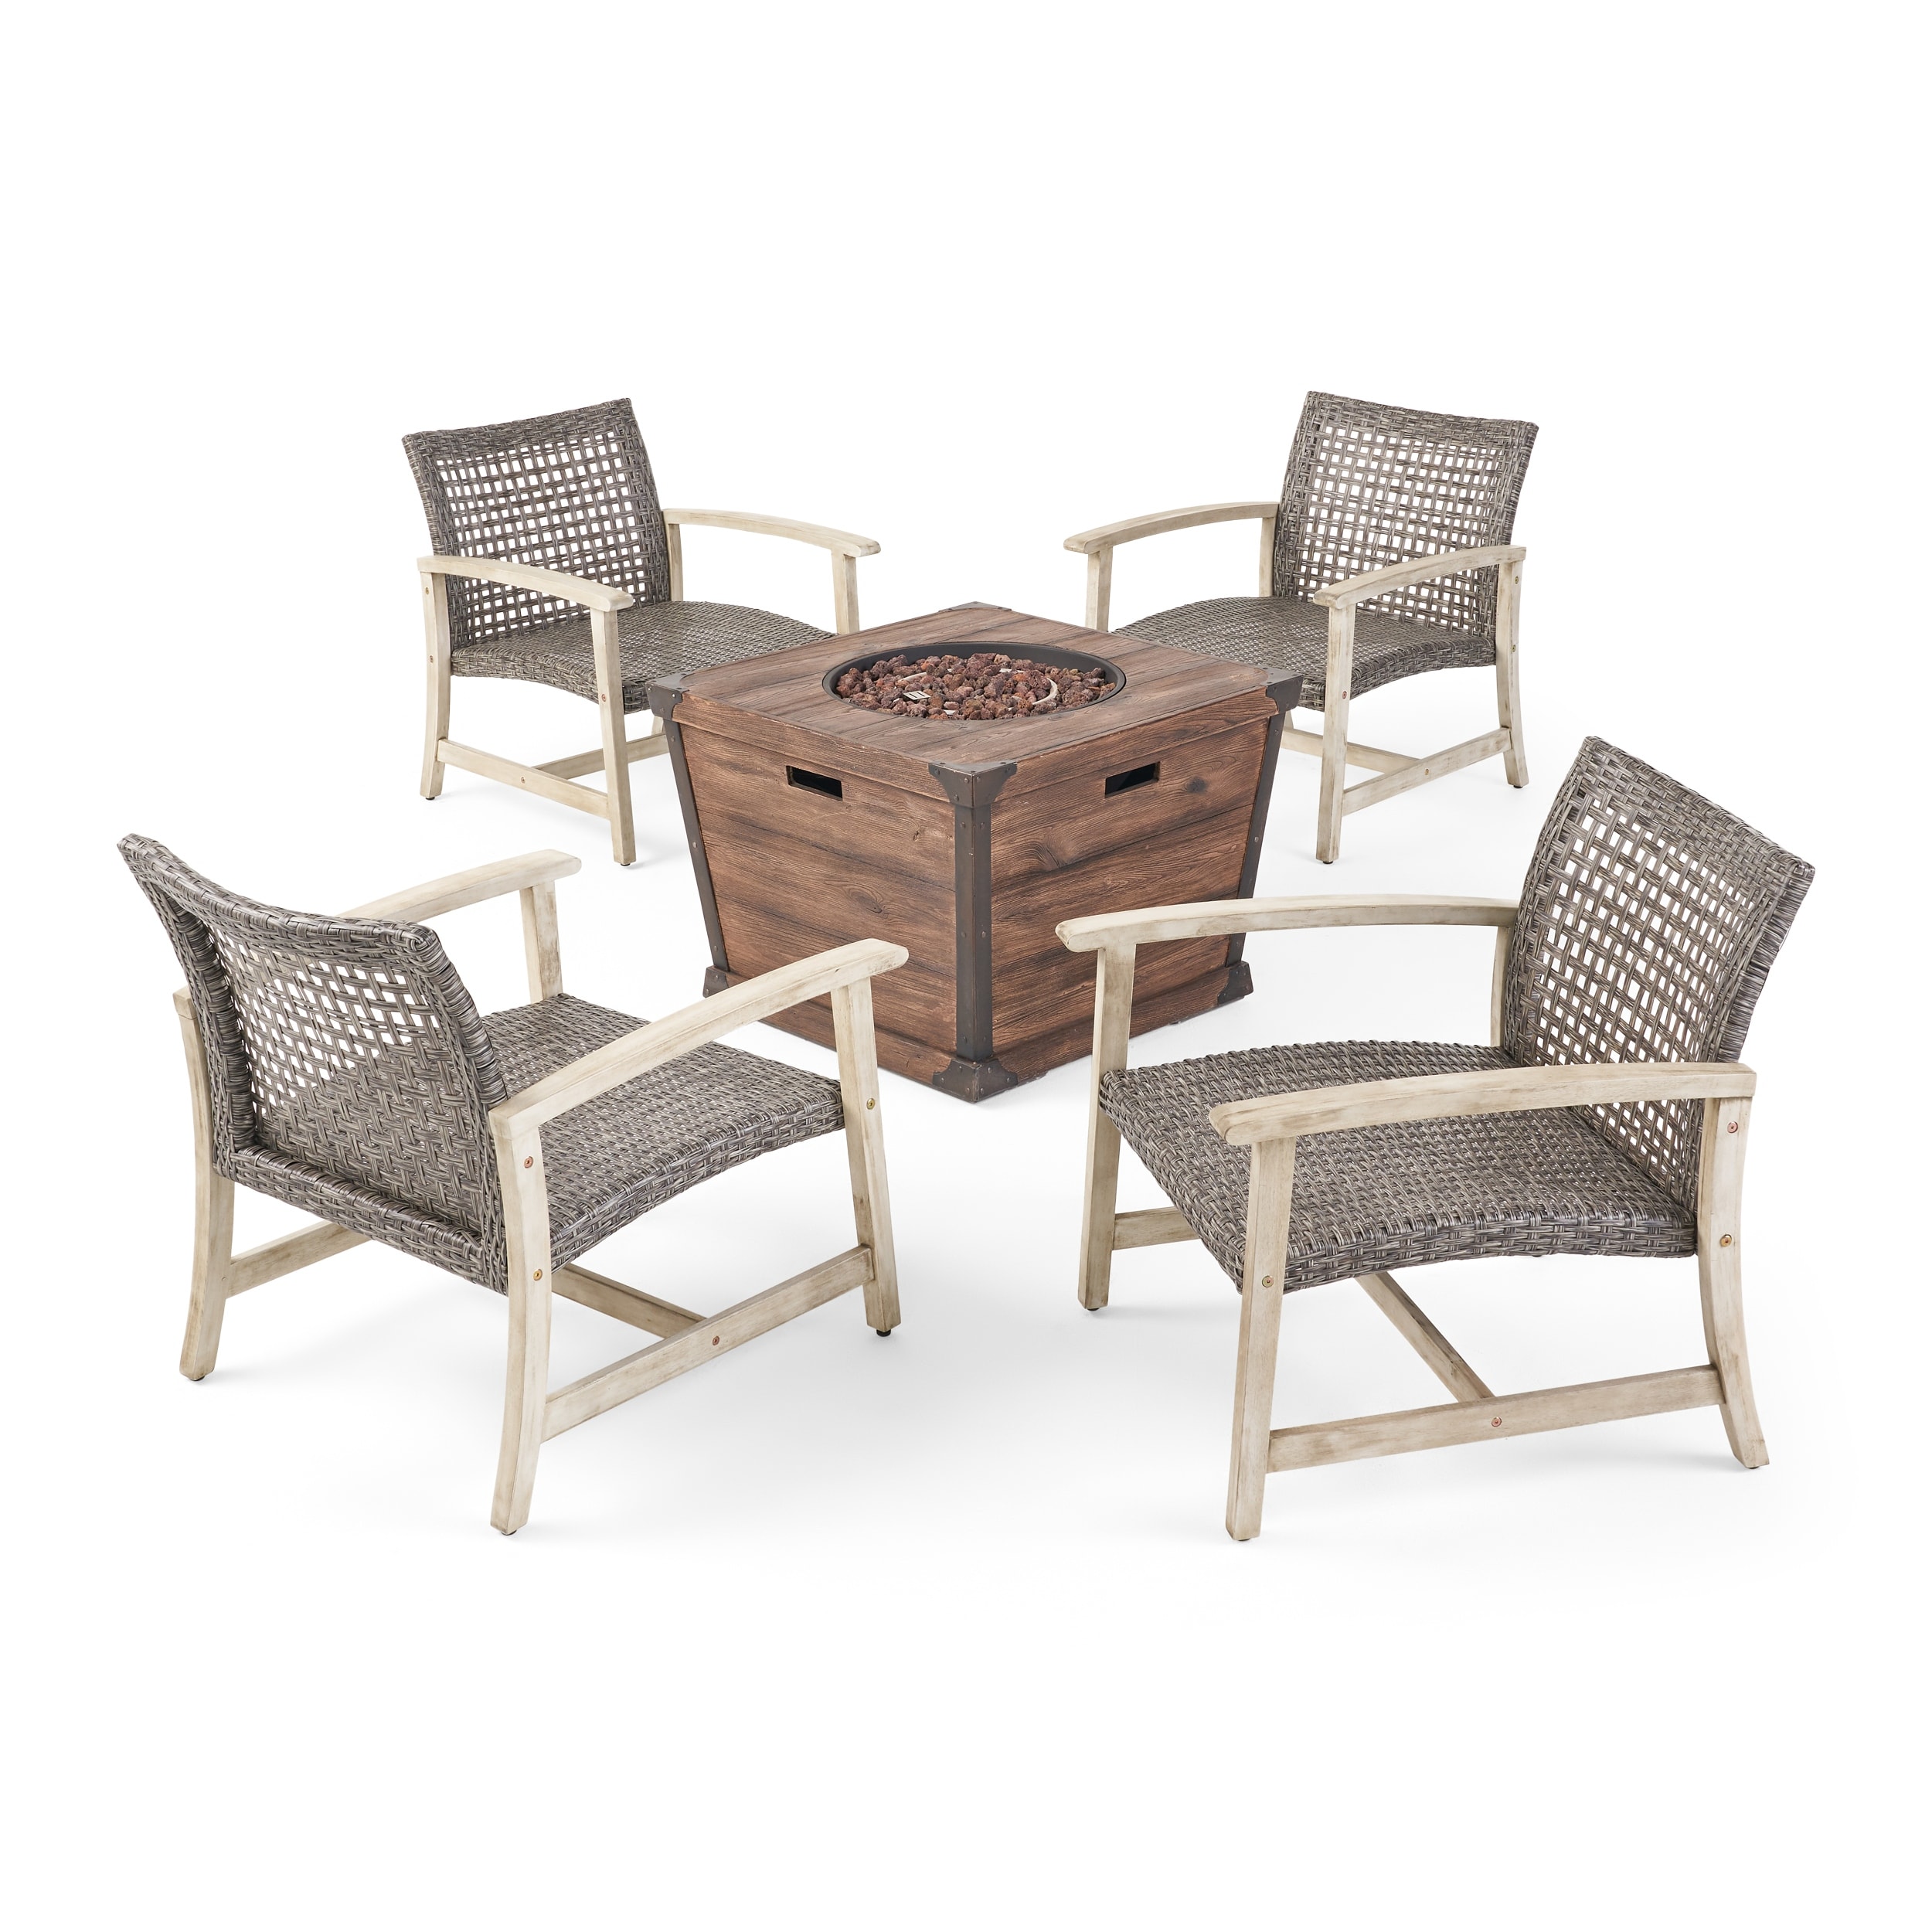 Christopher Knight Home Hampton Outdoor Wood and Wicker Club Chair Patio Set with Fire Pit